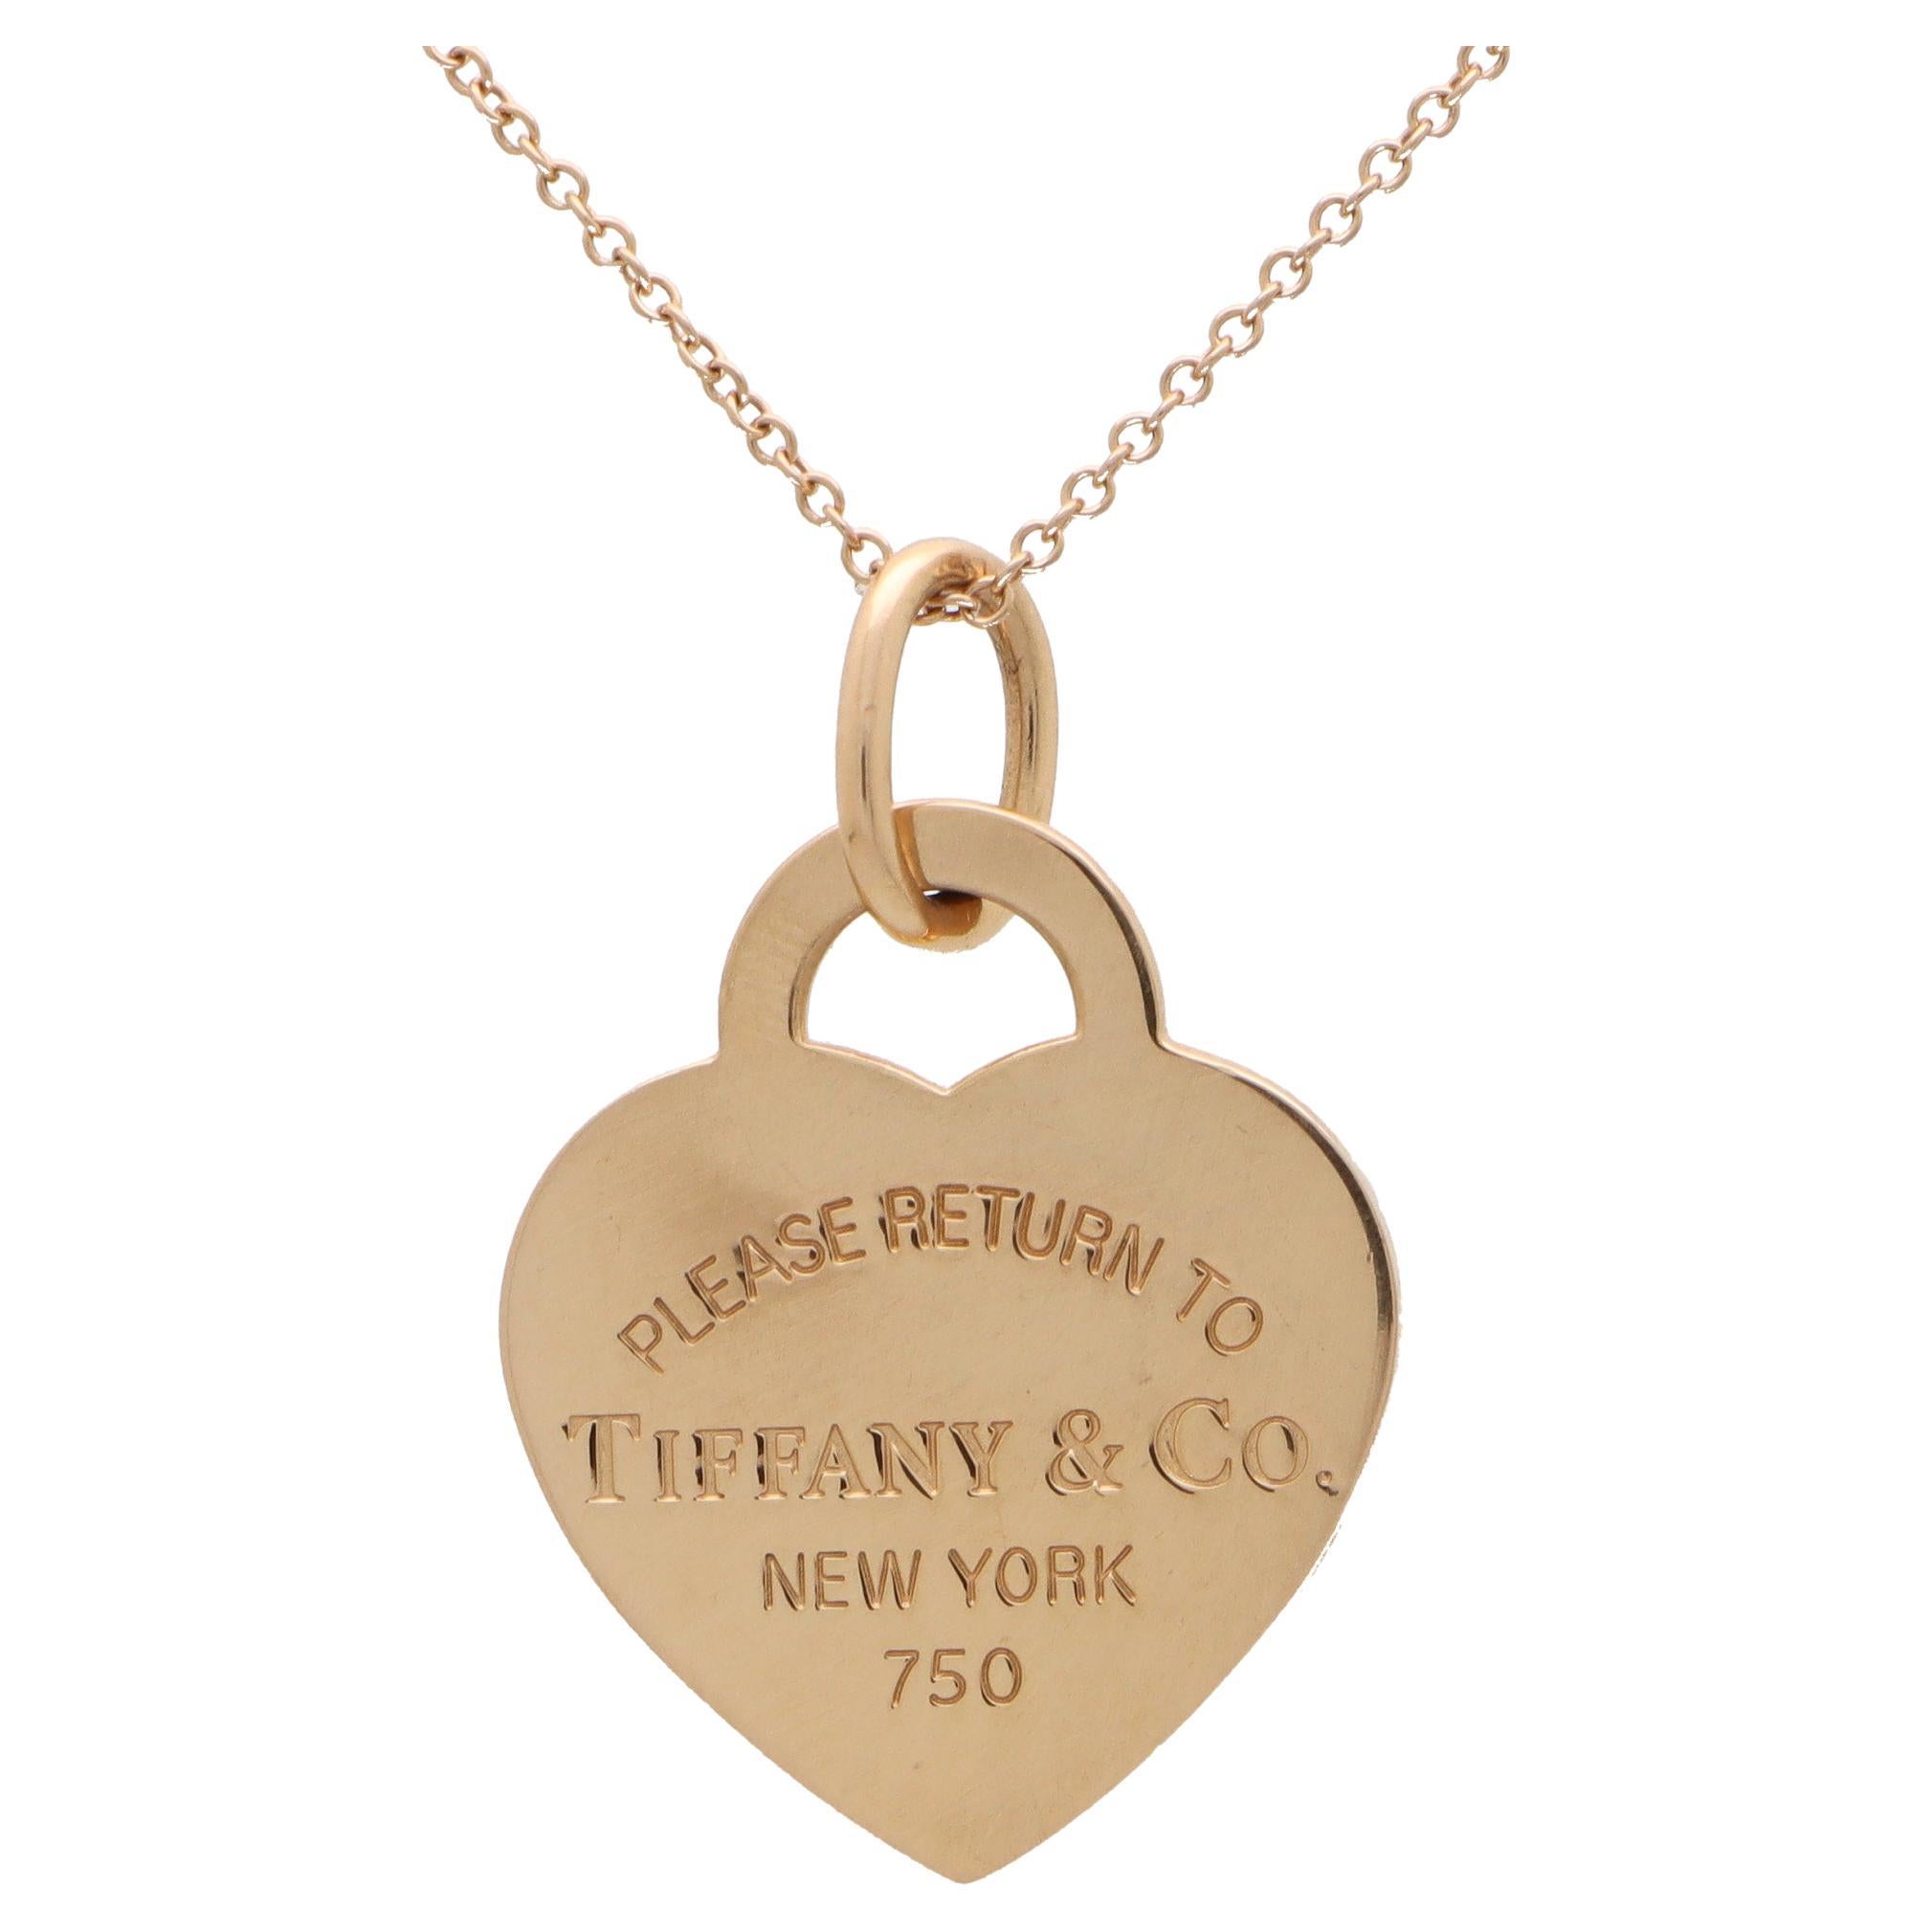 Vintage 'Return to Tiffany & Co.' Heart Tag Pendant Necklace in Rose Gold